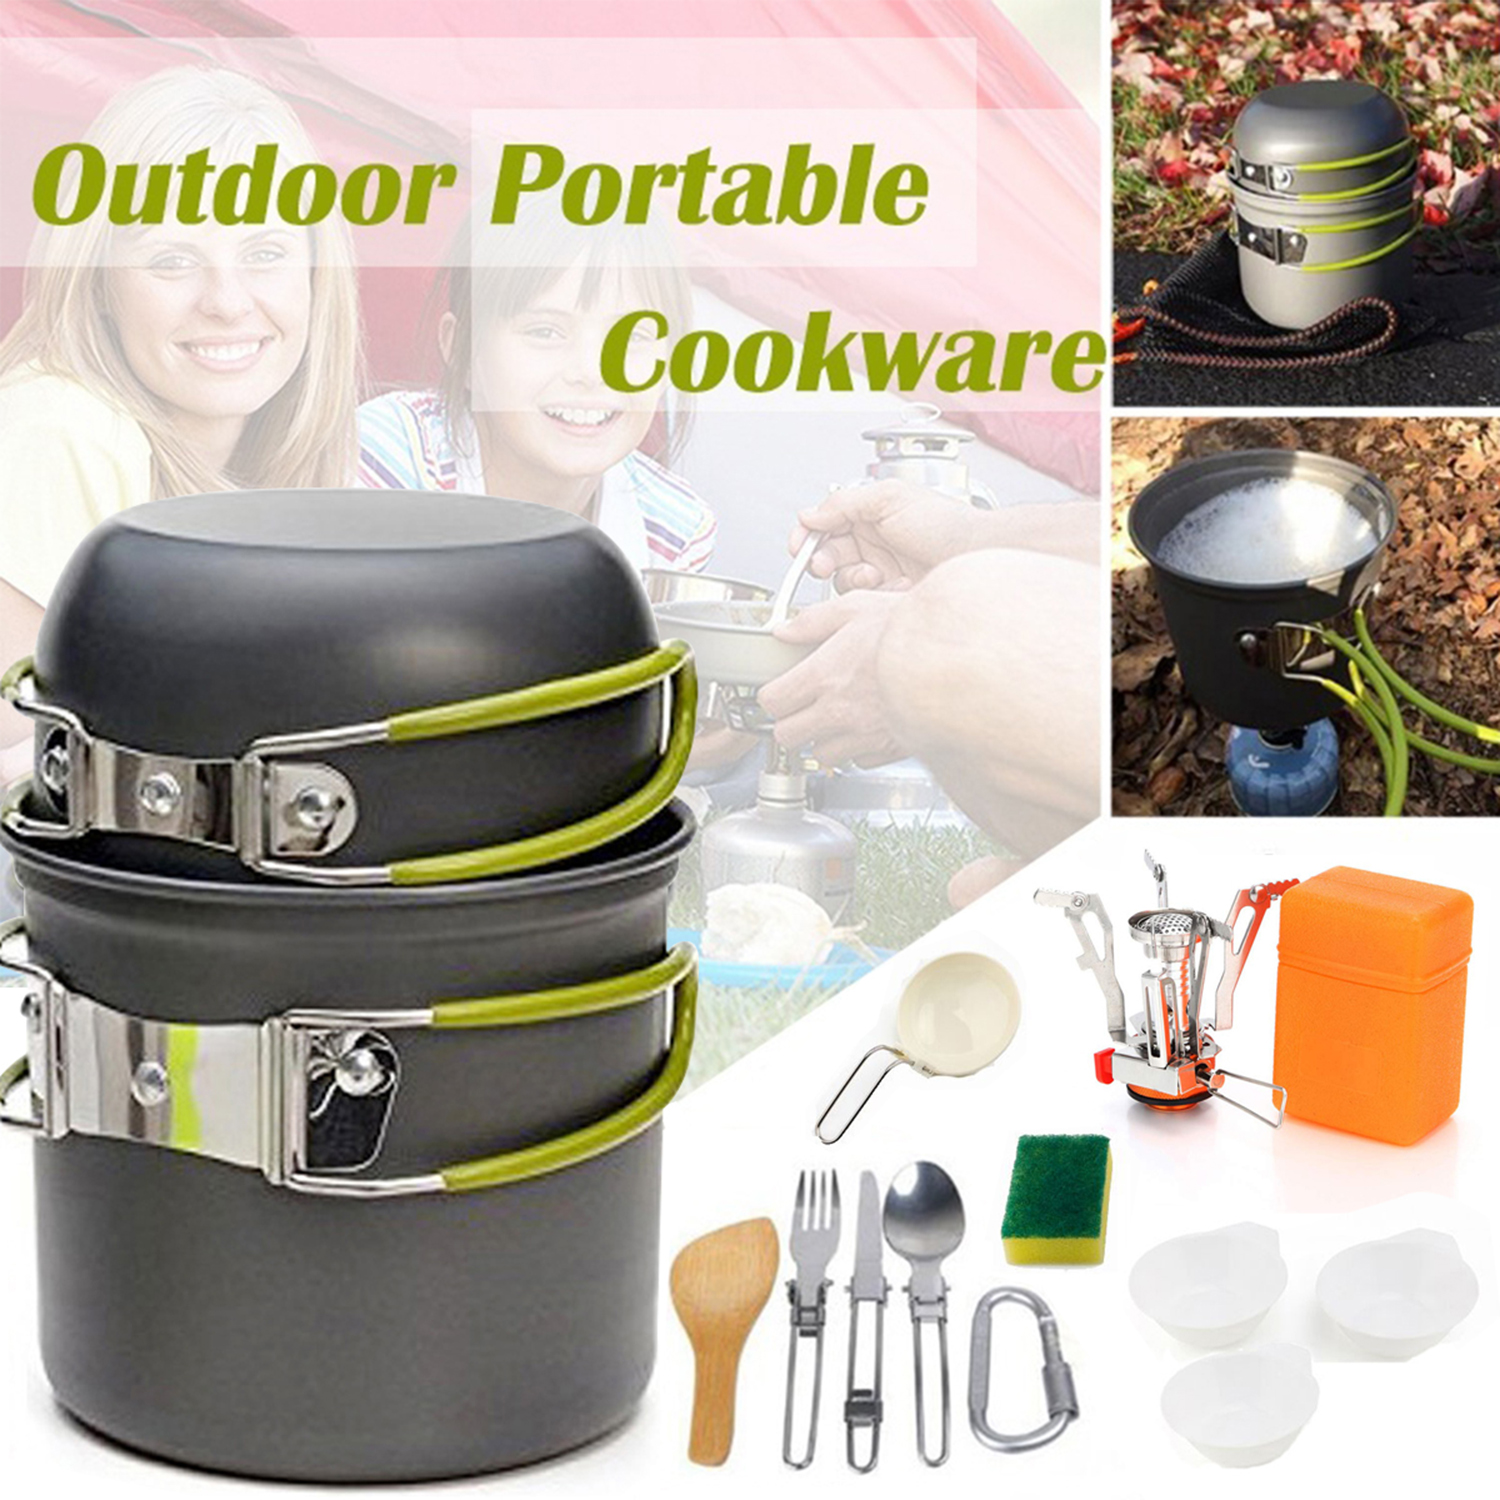 GL Portable Light Outdoor Camping Cookware Sets Gas Stove with Foldable Tableware Pan Dishwashing Sponge Hiking Picnic Tool 20